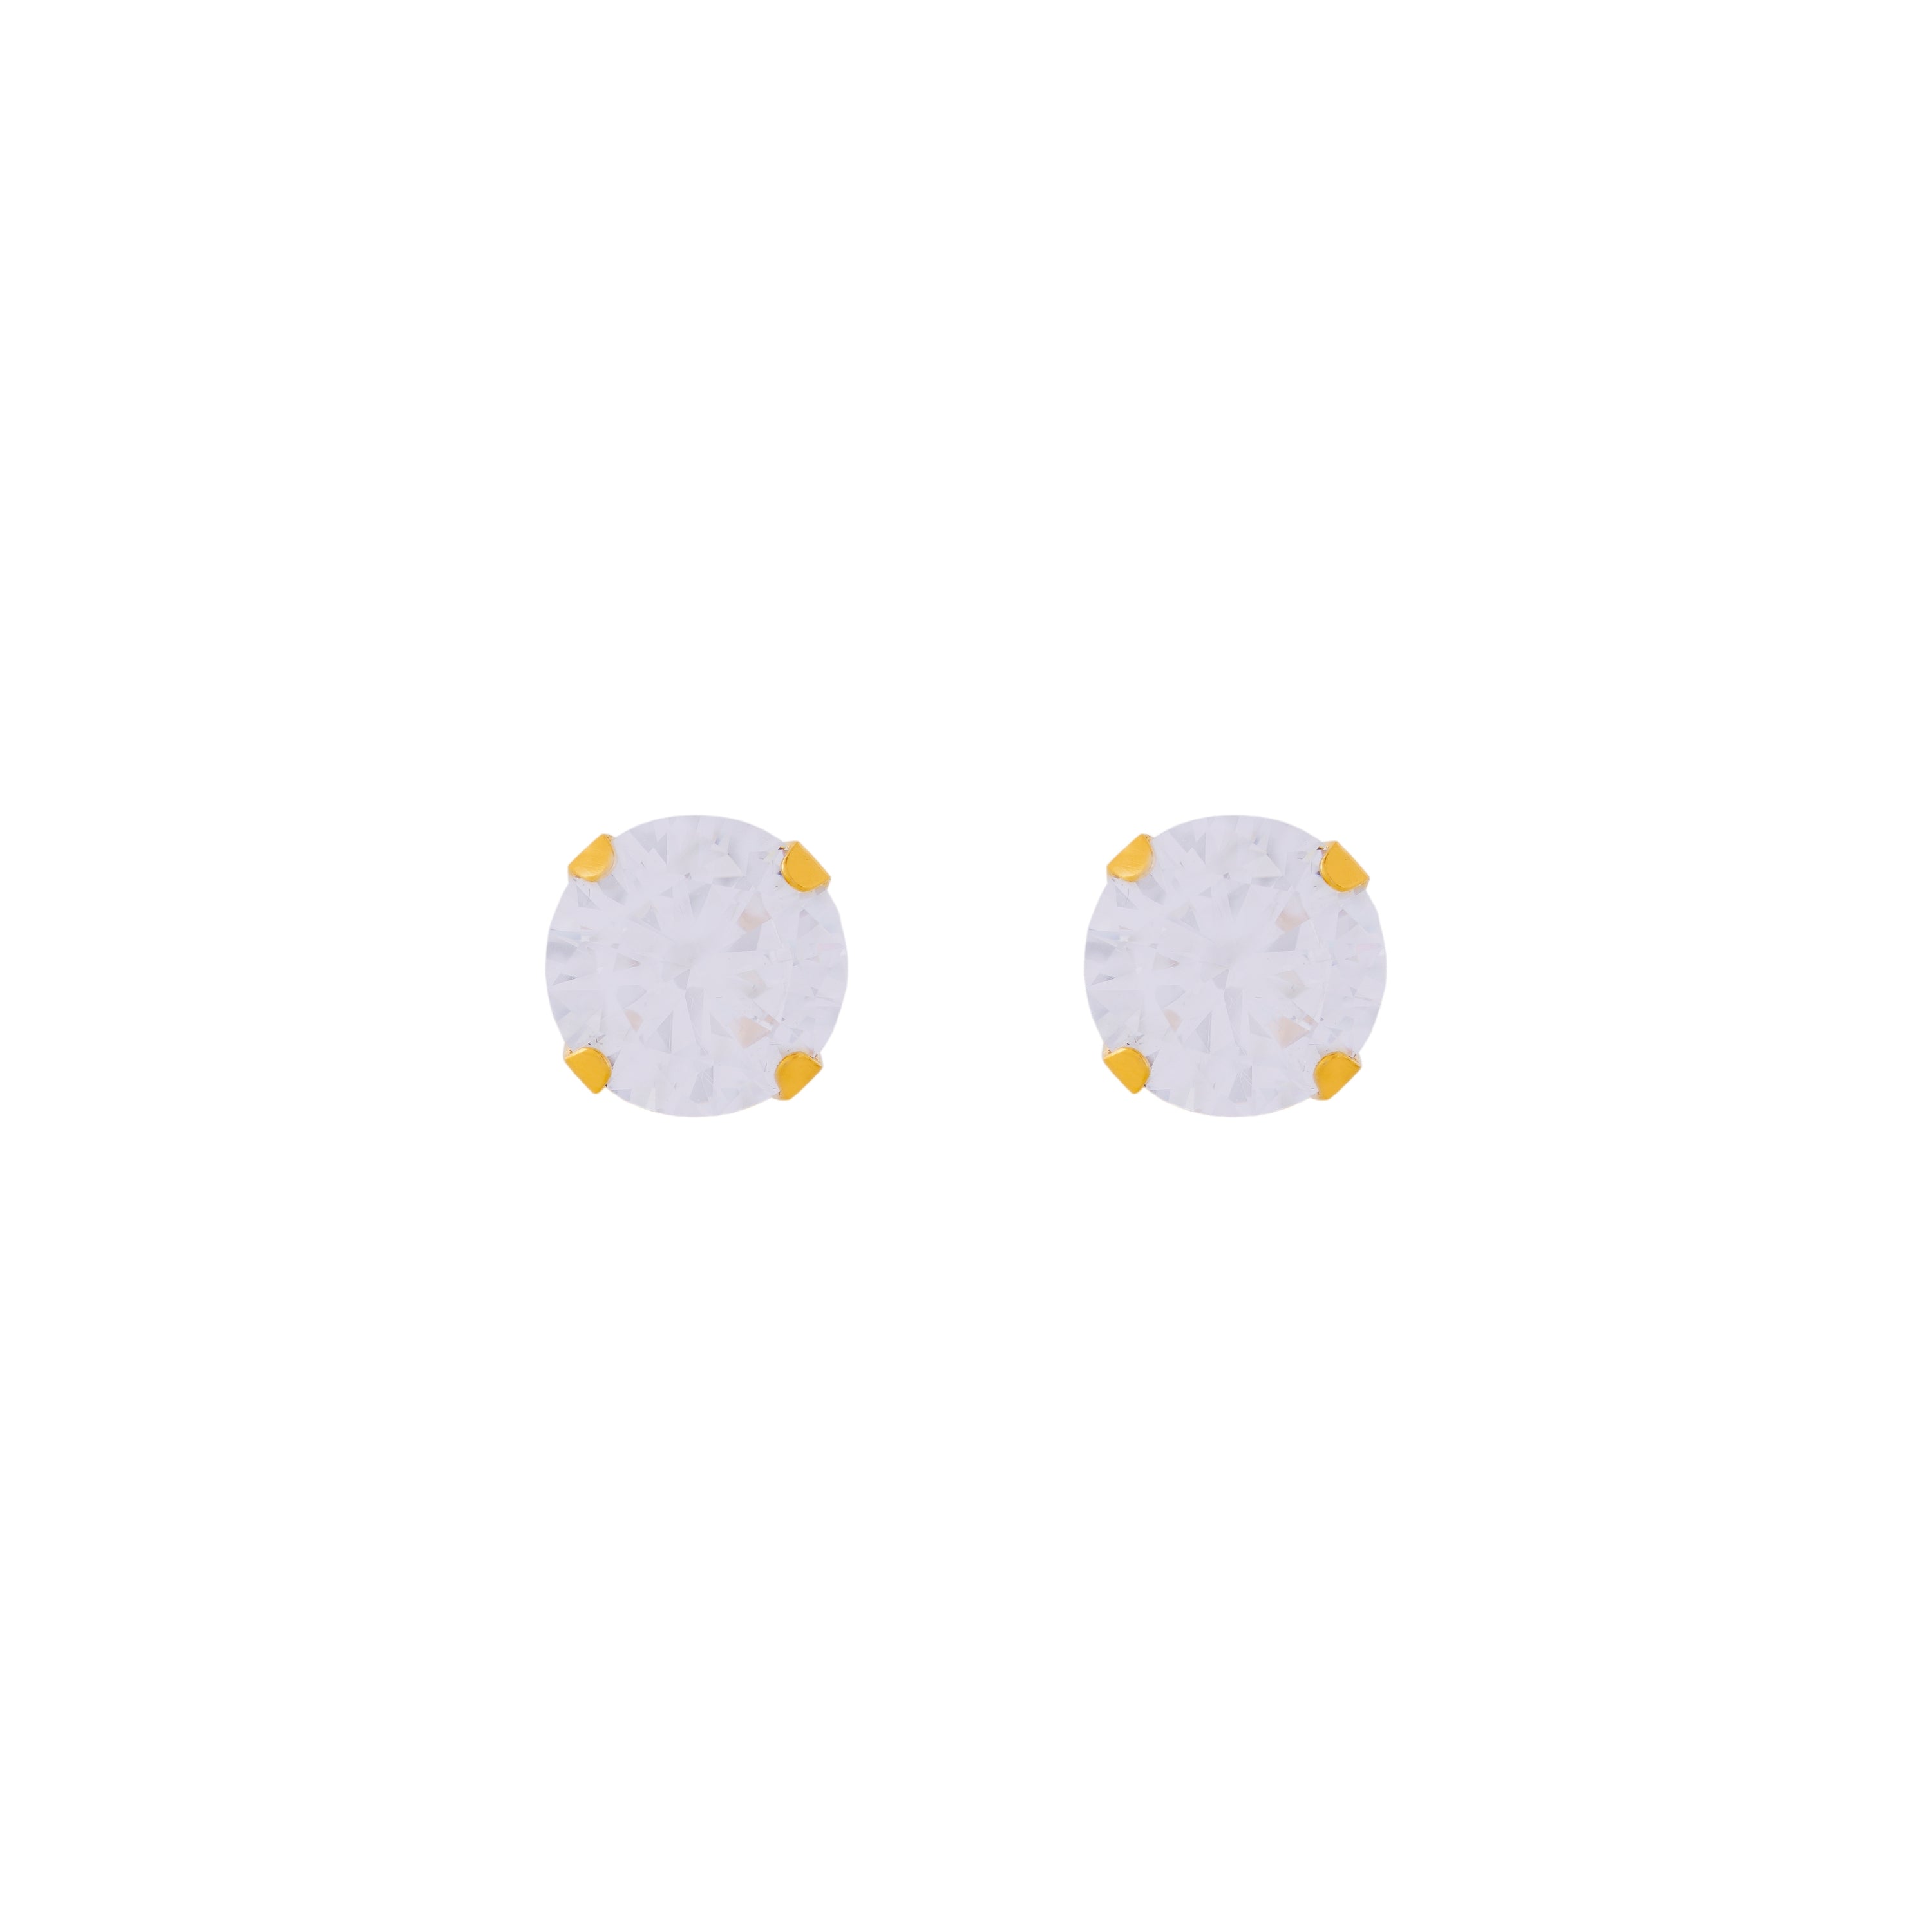 7MM Cubic Zirconia 24K Pure Gold Plated Ear Studs | MADE IN USA | Ideal for everyday wear